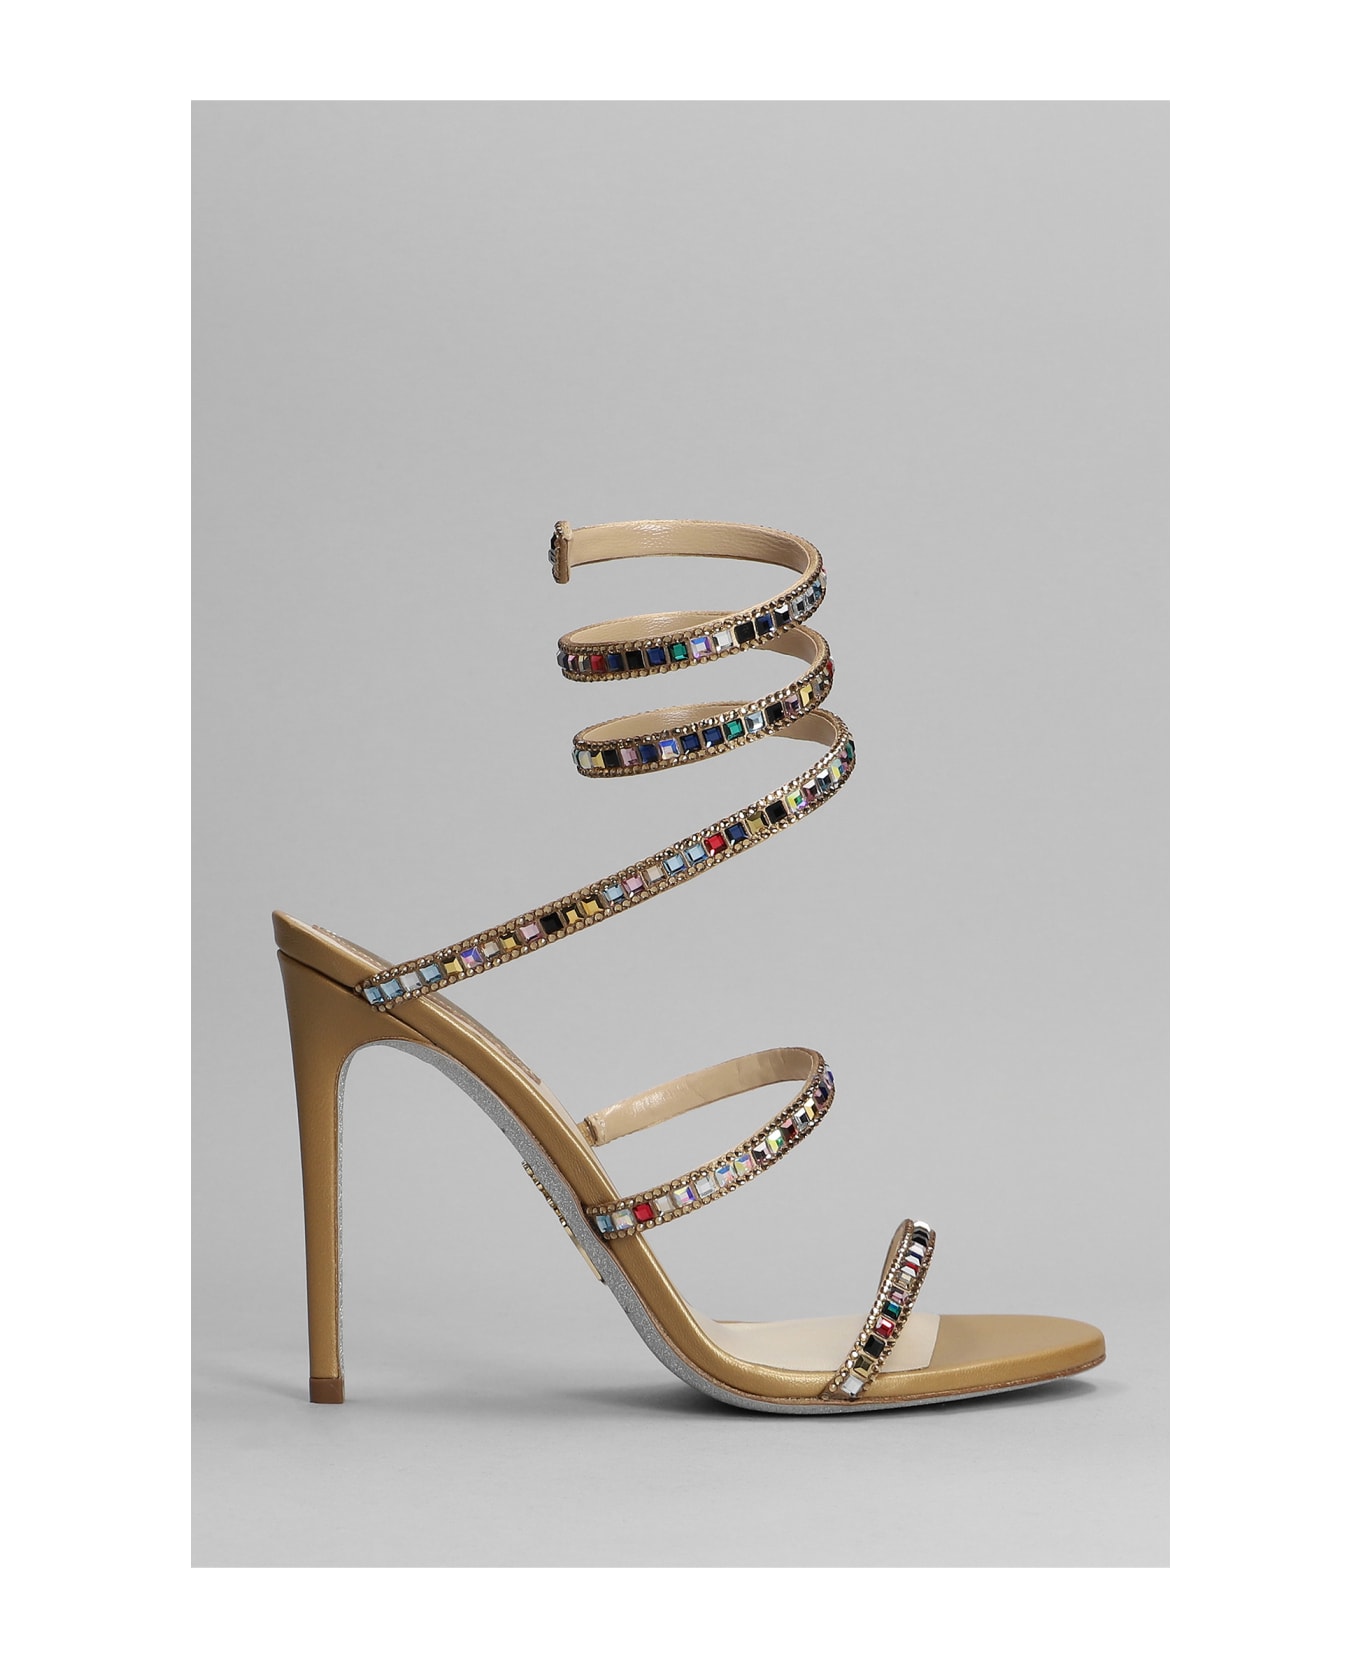 René Caovilla Cleo Sandals In Gold Leather | italist, ALWAYS LIKE A SALE